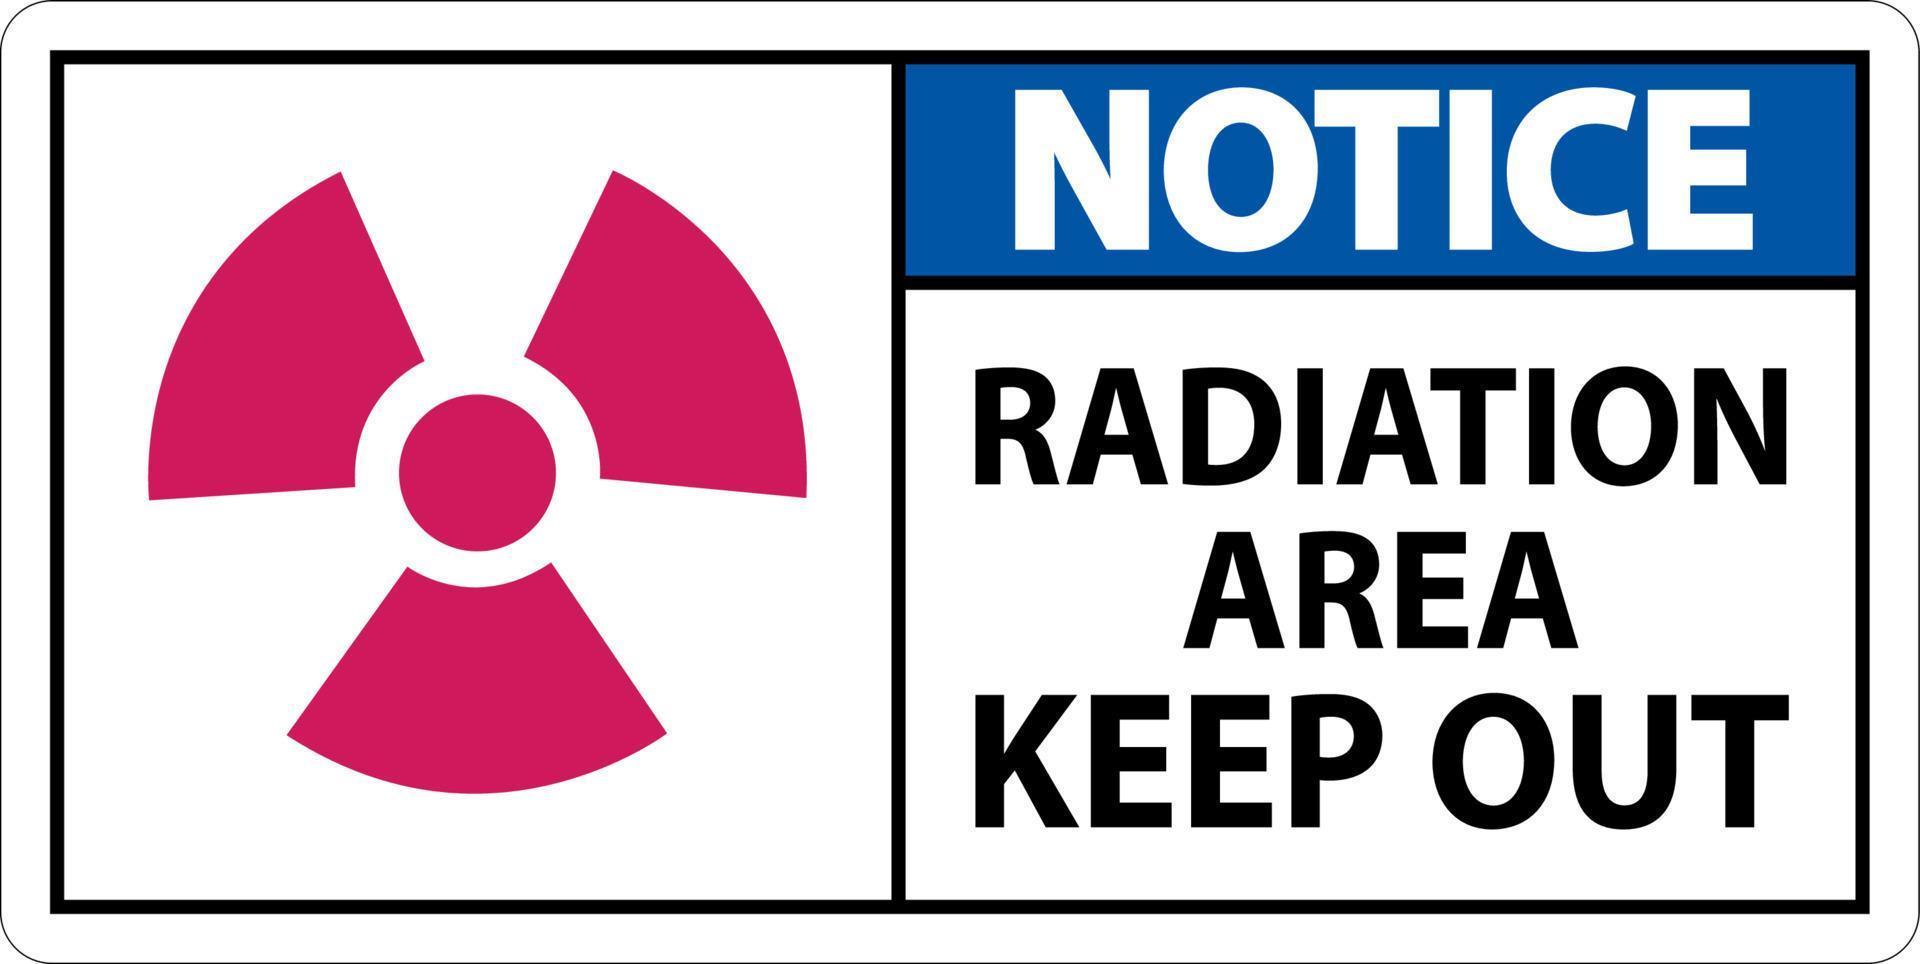 Notice Radiation Area Keep Out Sign On White Background vector